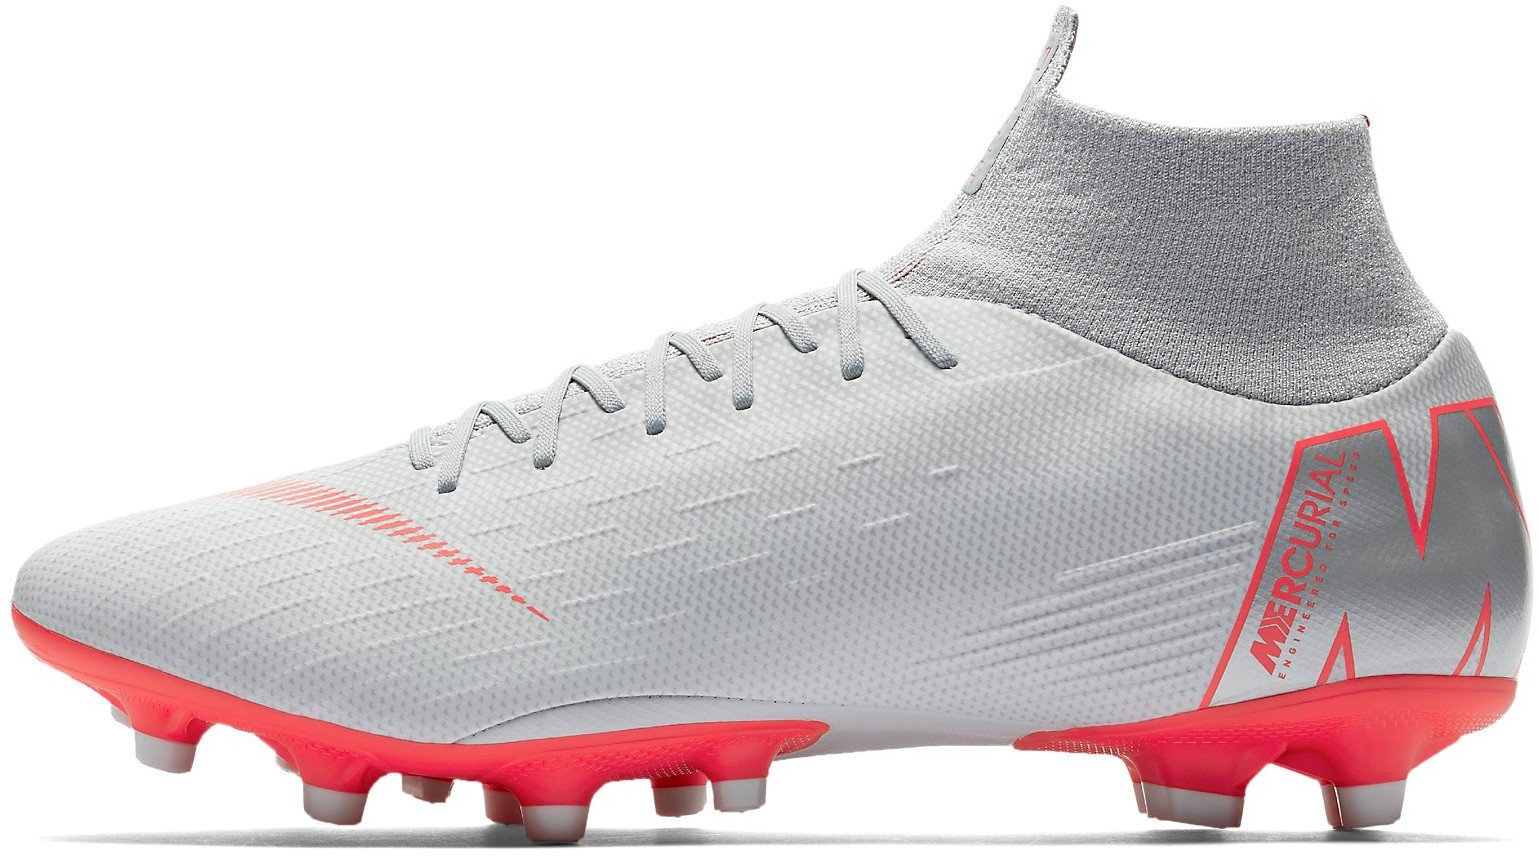 Football shoes Nike Superfly 7 Elite AG Pro M AT7892 001.